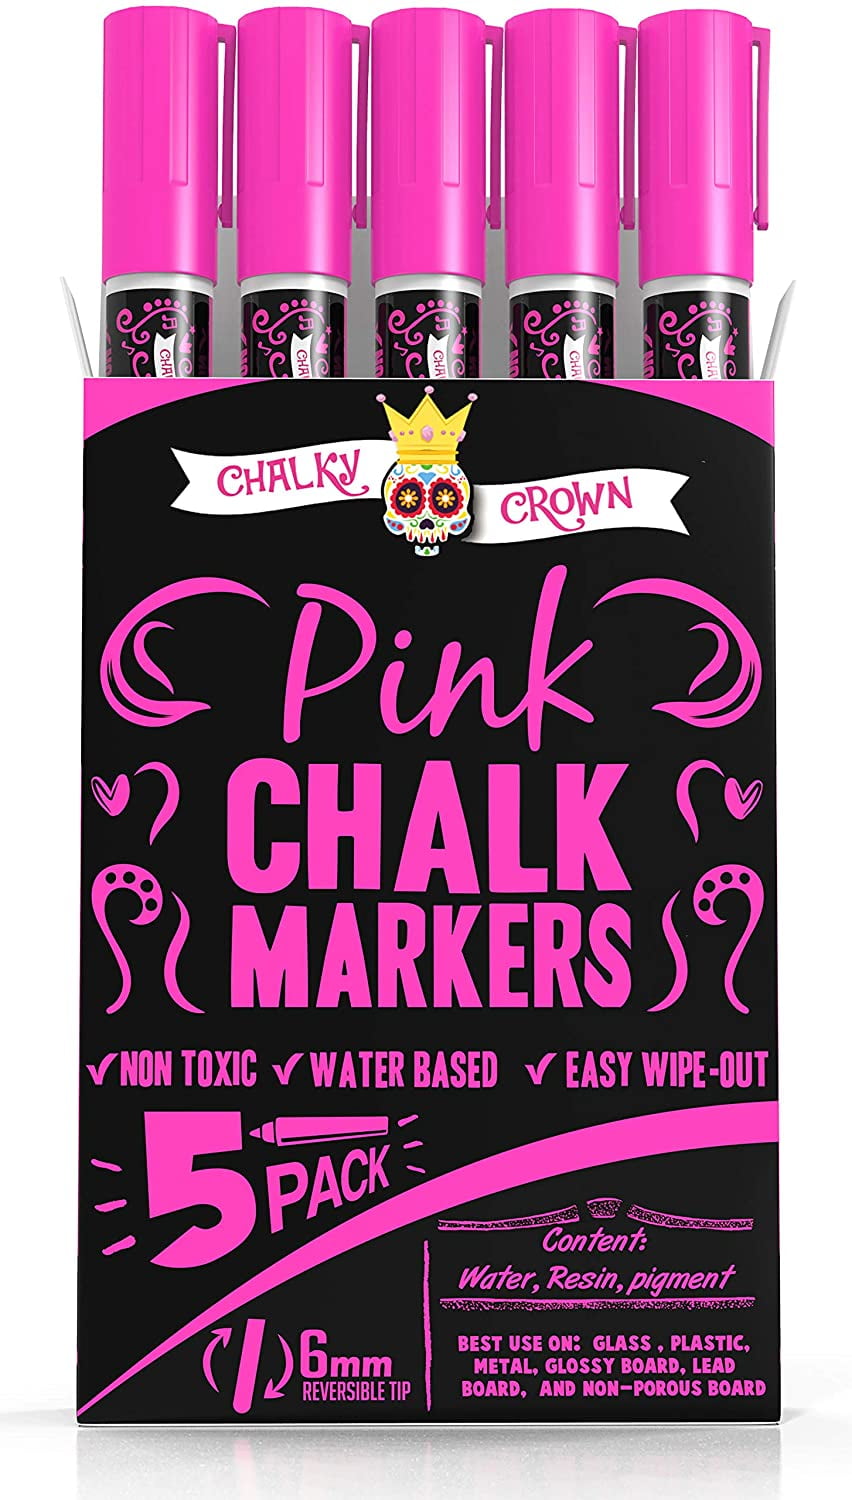 Chalky Crown Liquid Chalk Markers - Dry Erase Marker Pens - Chalk Markers  for Chalkboards, Signs, Windows, Blackboard, Glass - Reversible